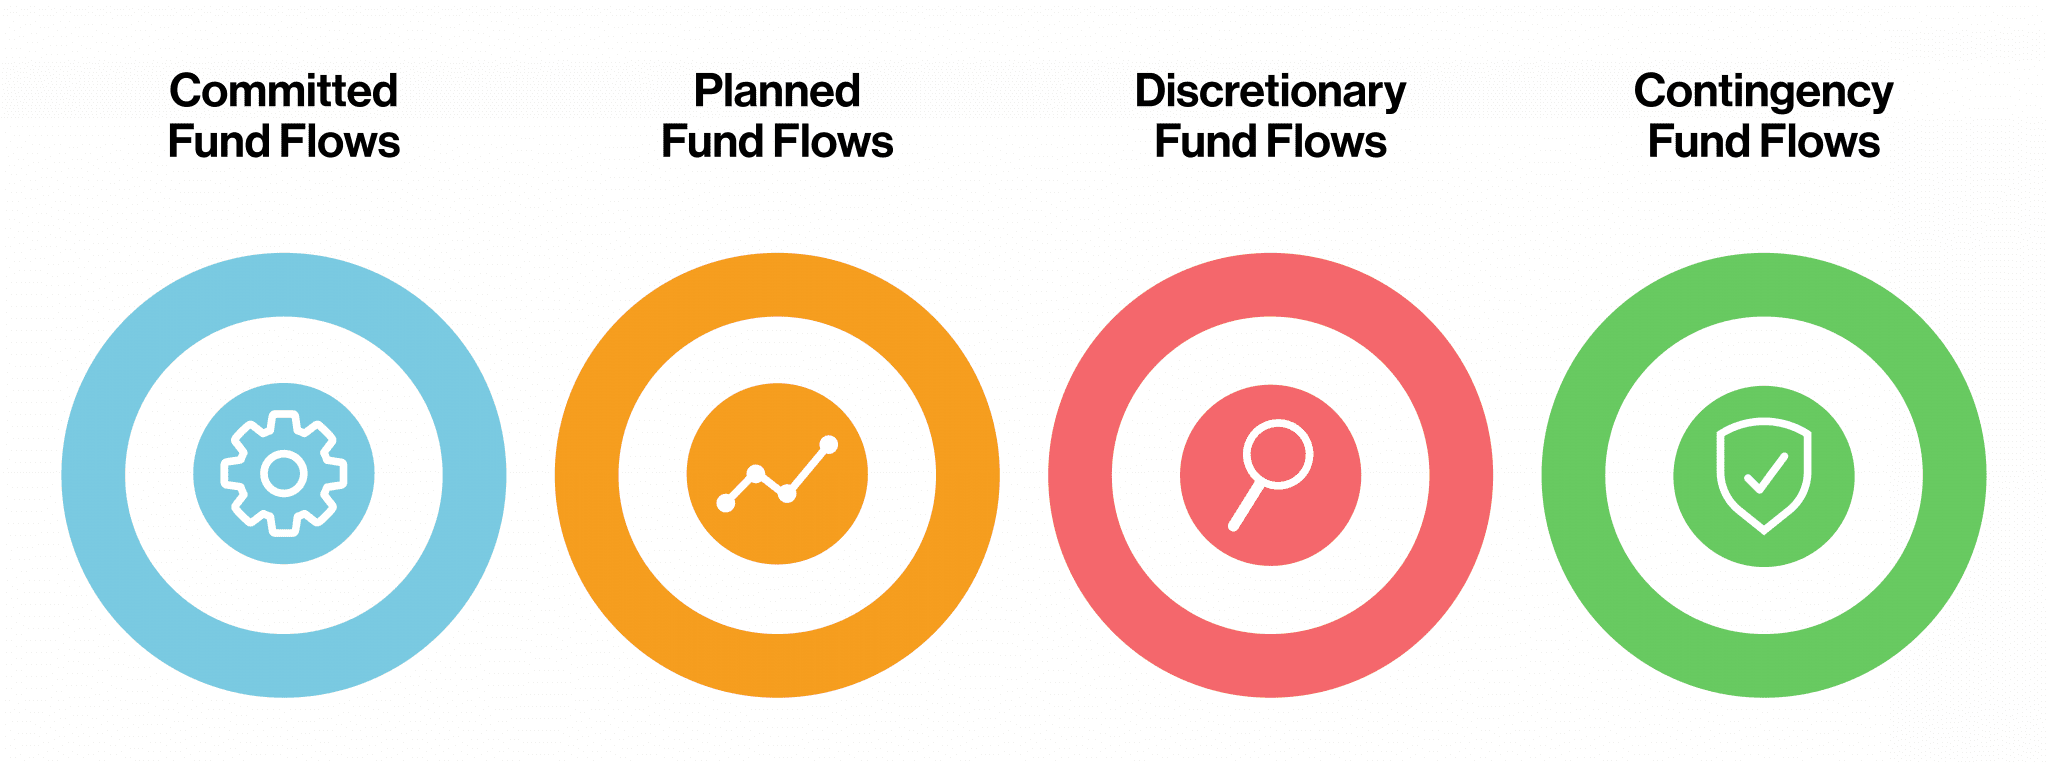 Reserved Reporting Example Buckets: Committed Fund Flows, Planned Fund Flows, Discretionary Fund Flows, Contingency Fund Flows.